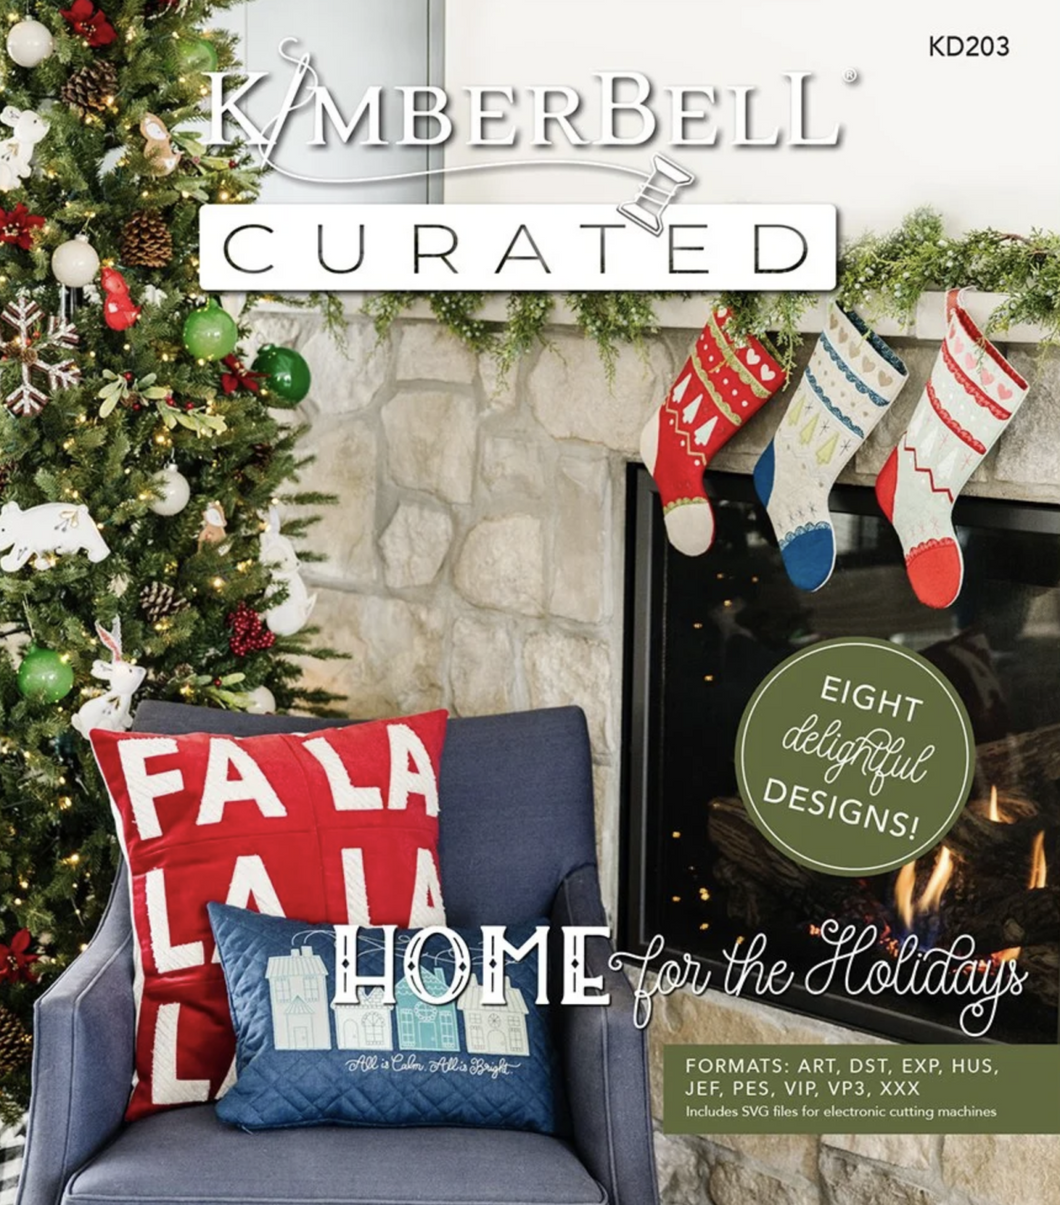 Kimberbell Curated: Home for the Holidays USB